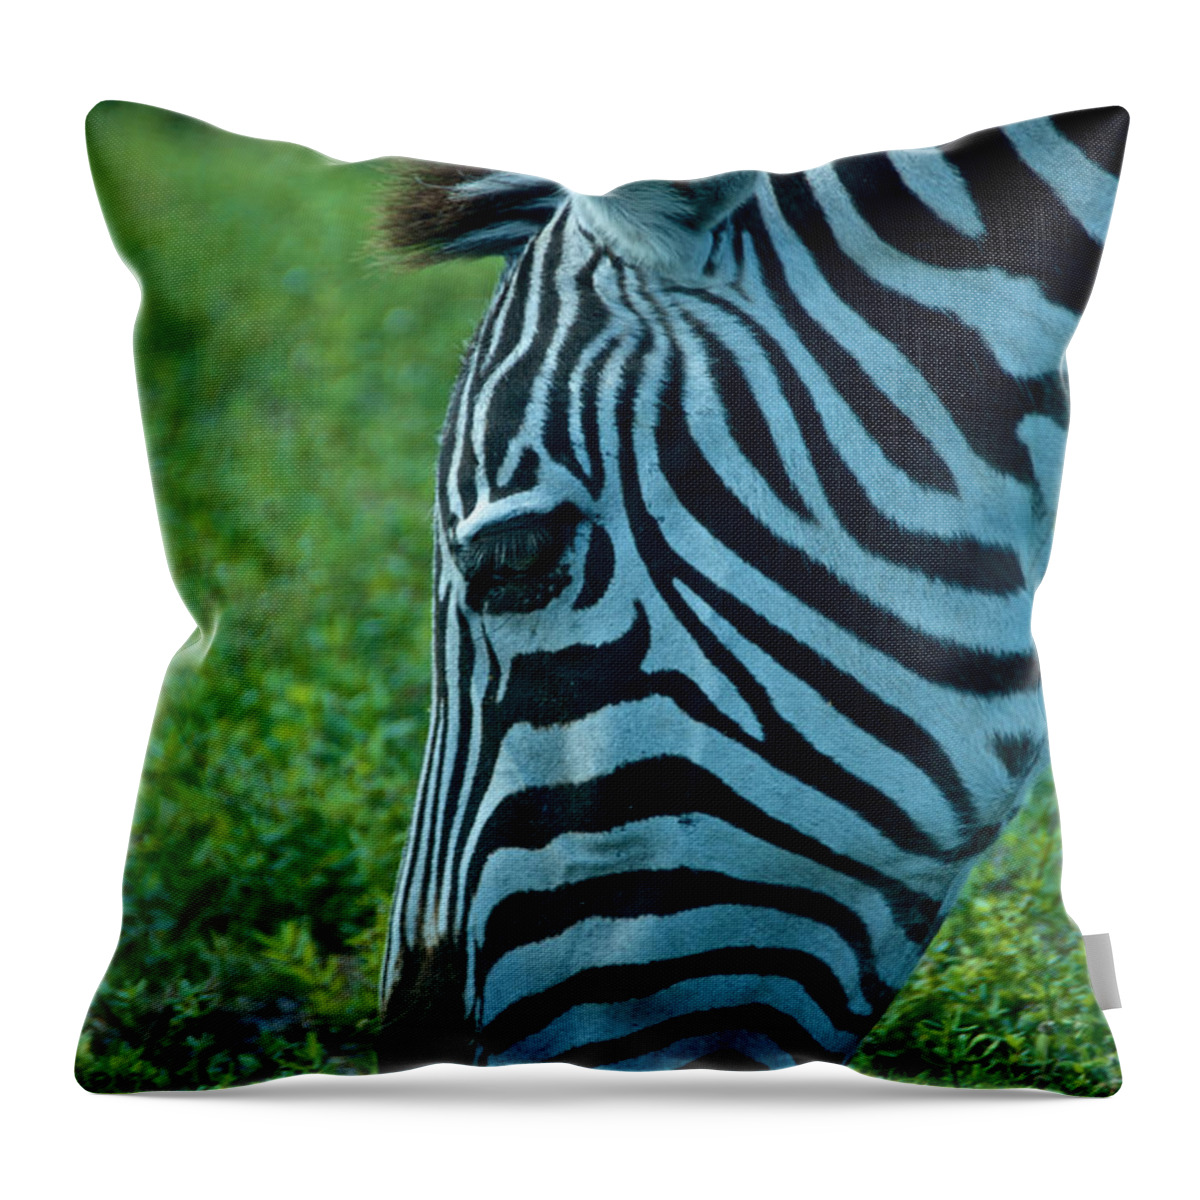 Alligators Throw Pillow featuring the photograph Stripes by Kathi Isserman